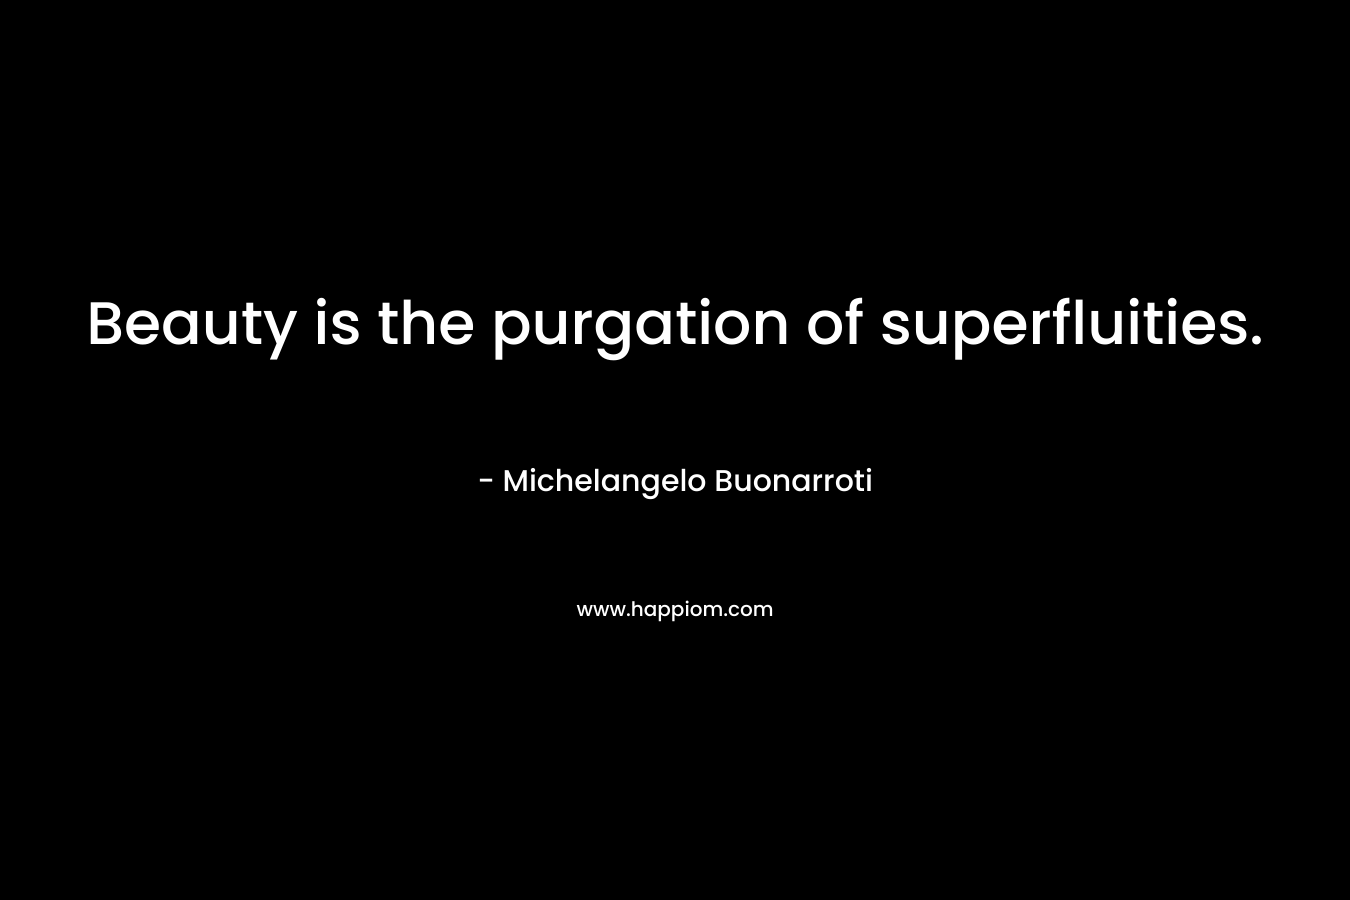 Beauty is the purgation of superfluities.